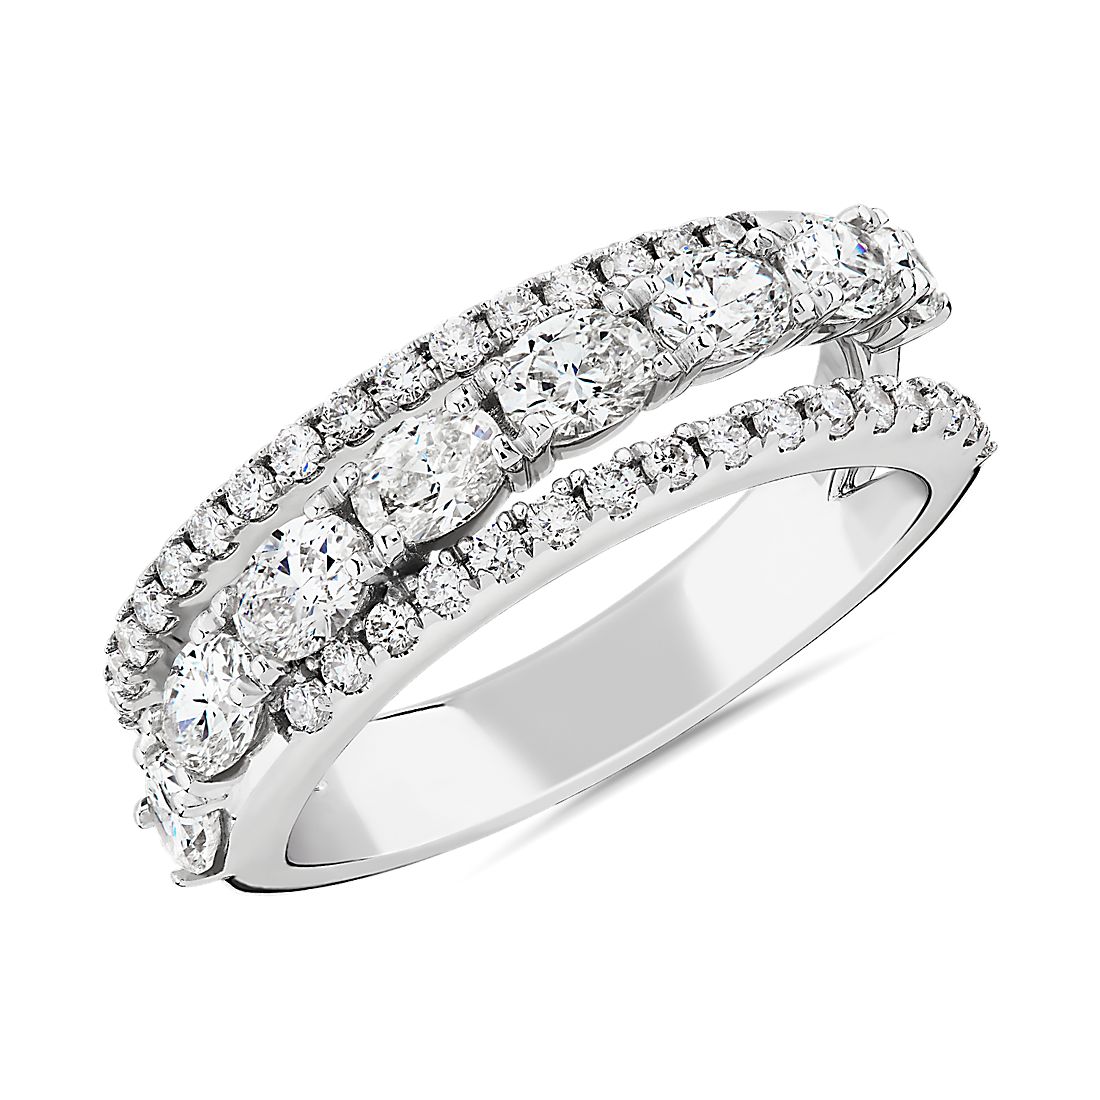 Oval Cut Diamond Crossover Anniversary Ring in 14k White Gold (1 1/3 ct. tw.)